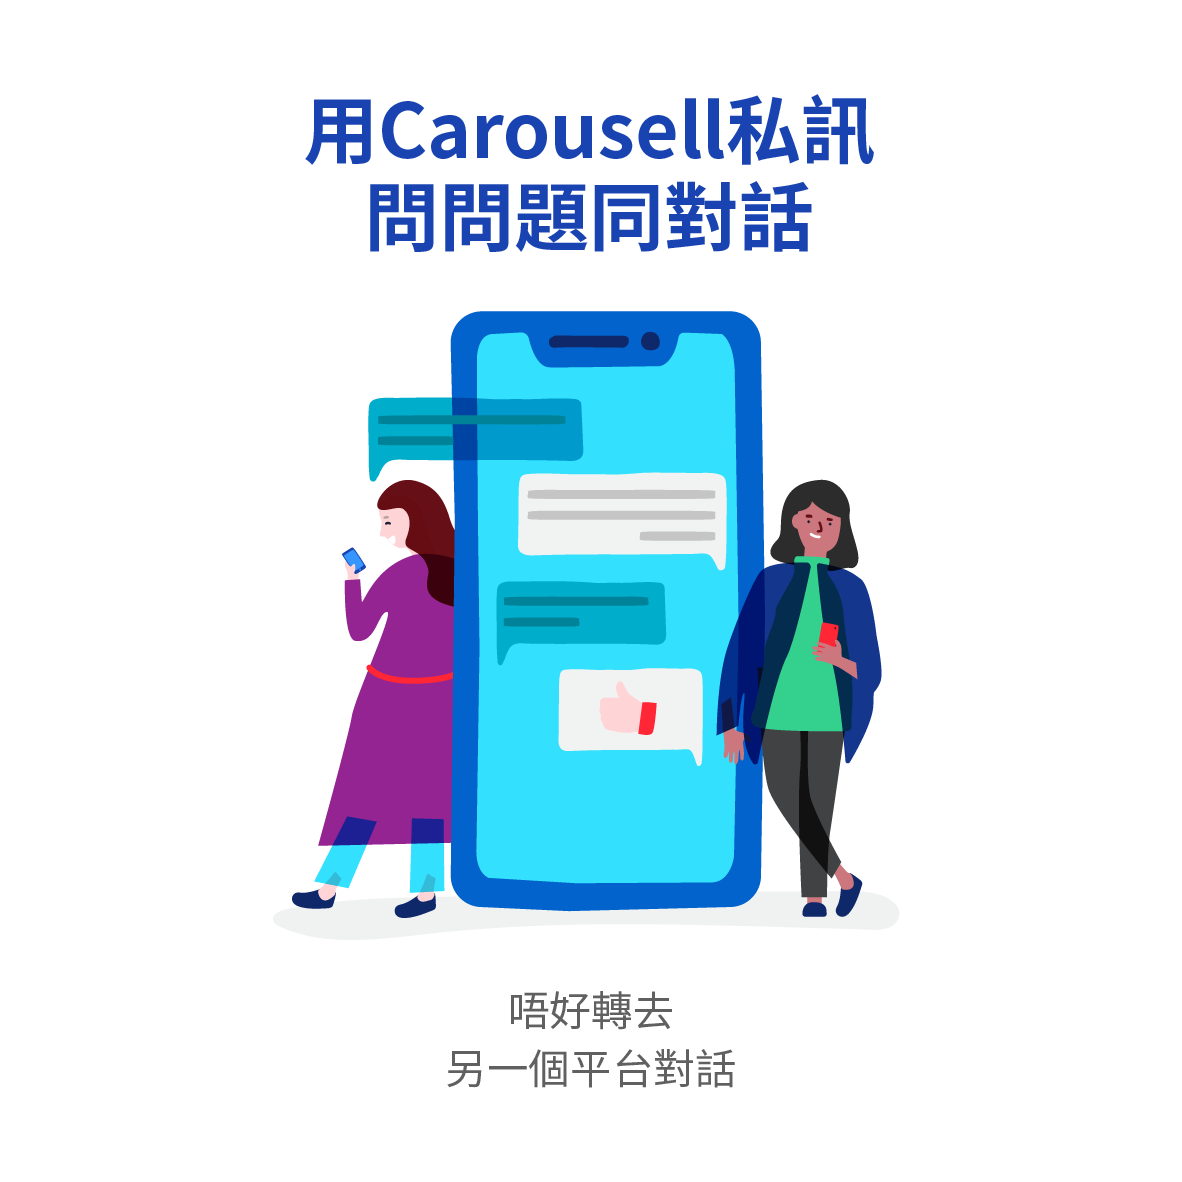 HelpCentre_How-to-deal-safely-on-Carousell_HK-2.png